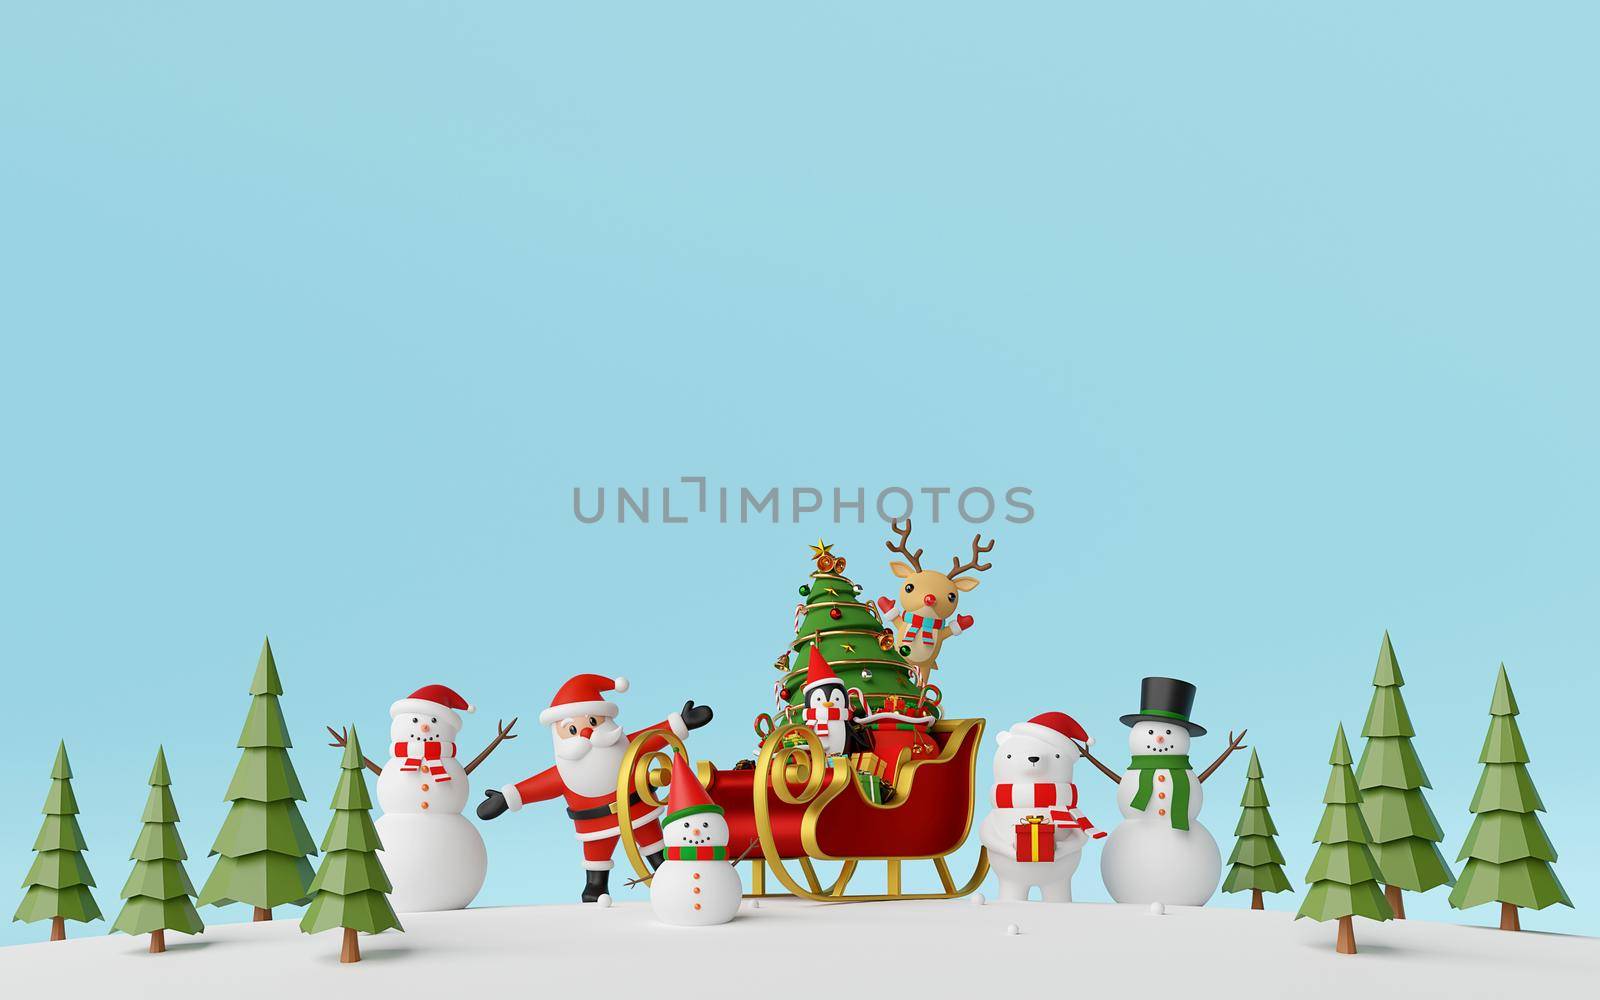 Merry Christmas and Happy New Year, Santa Claus and friends with sleigh full of gifts in pine forest, 3d rendering by nutzchotwarut